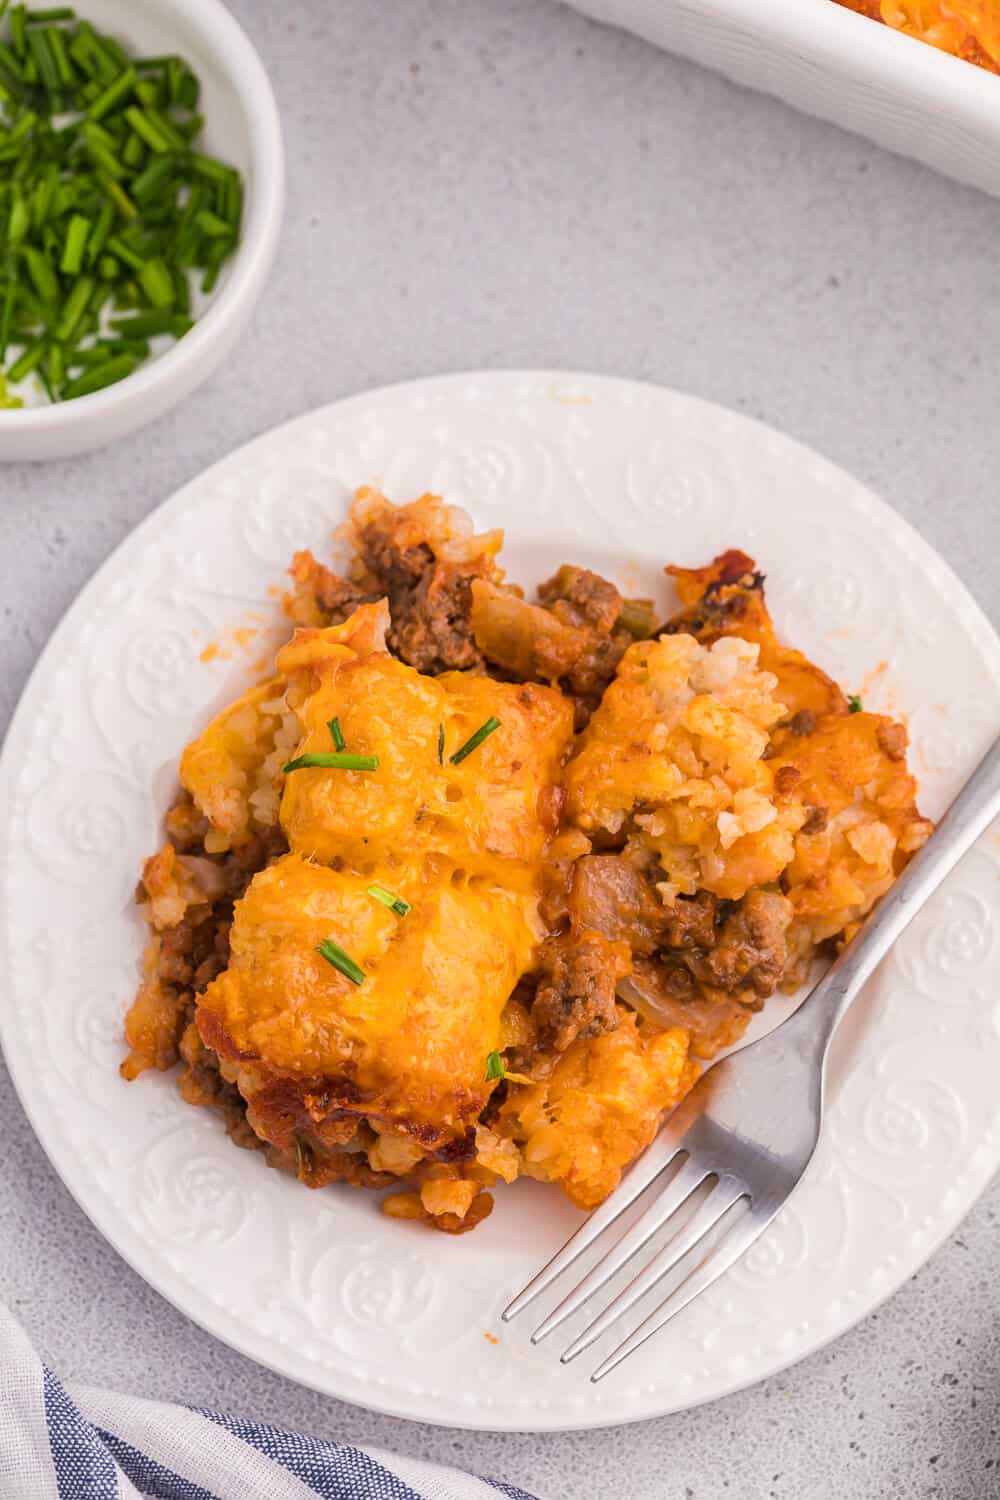 Sloppy joe tater tot casserole served on a plate with a fork.